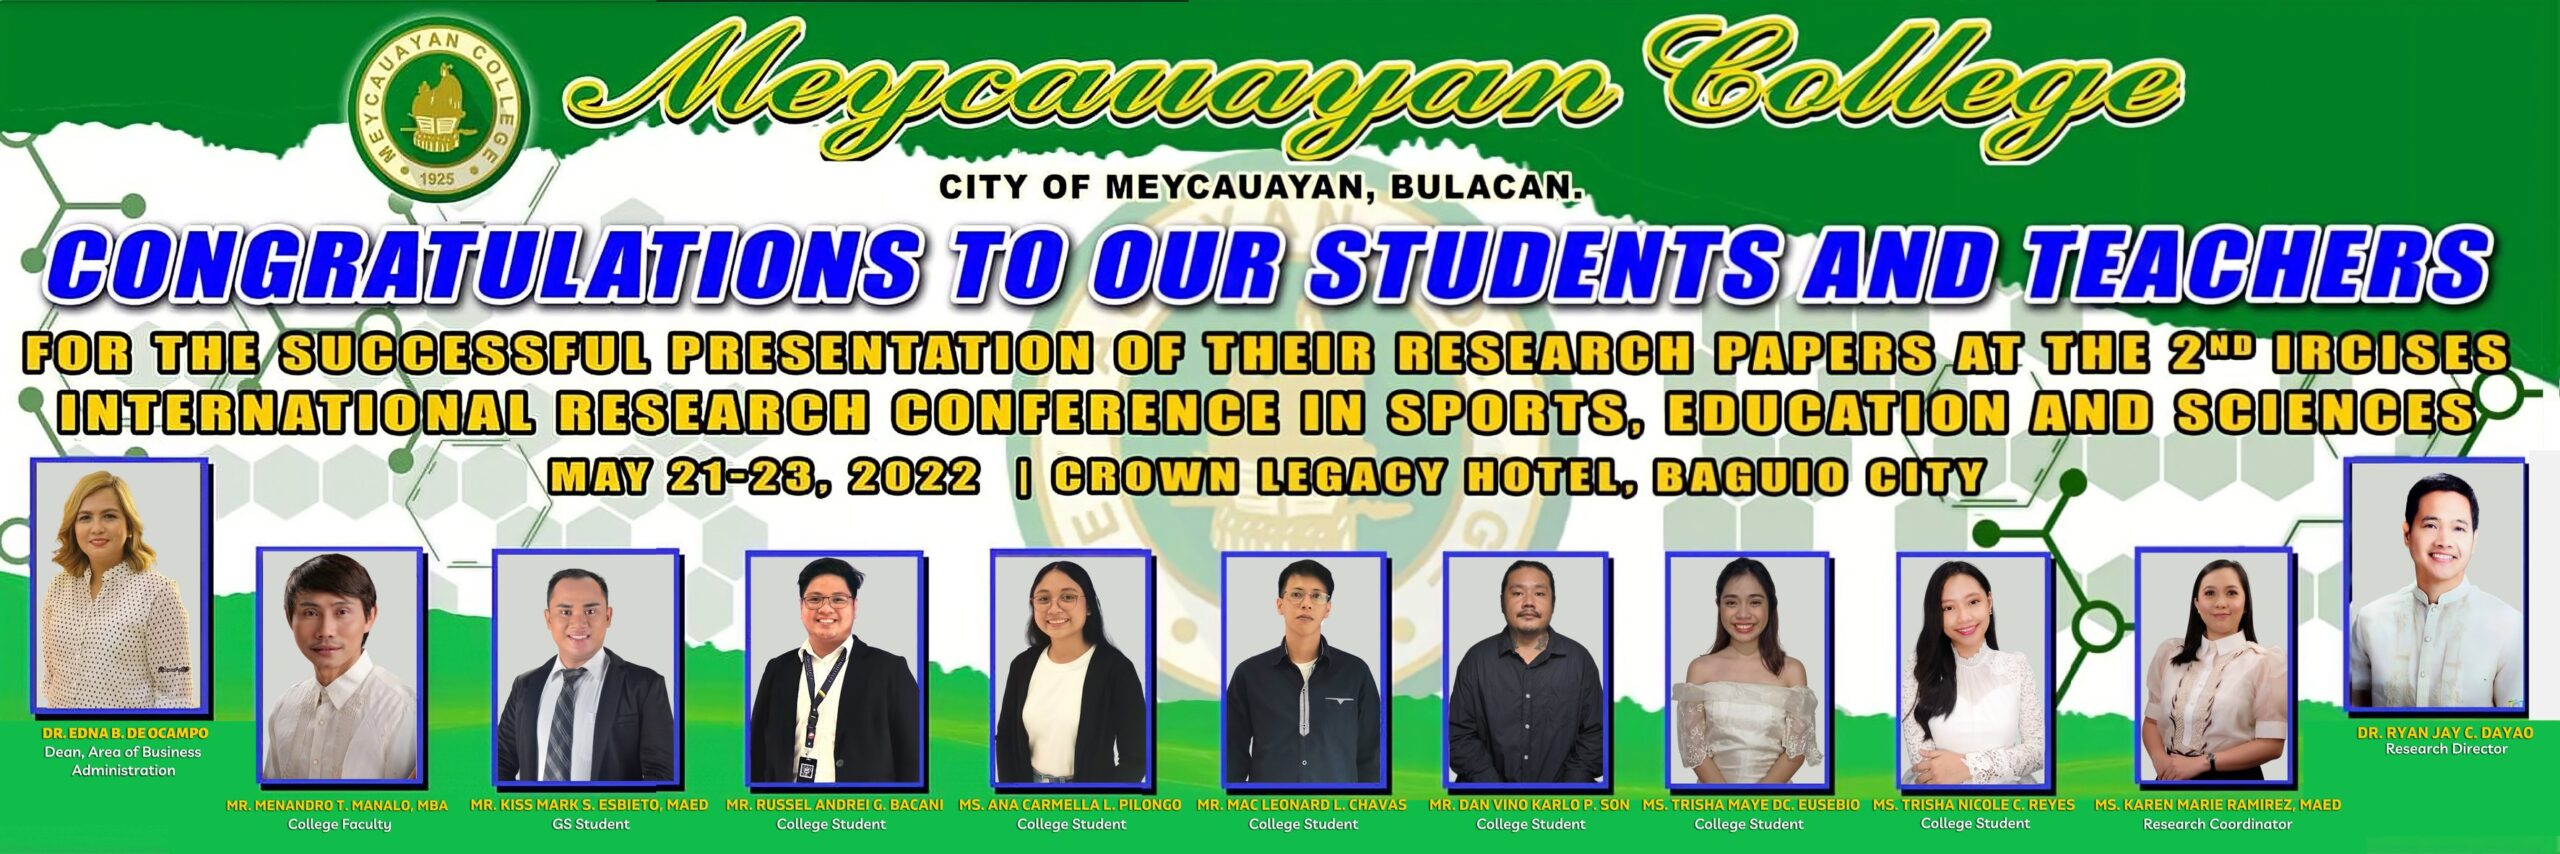 MC RPLO sets out to Baguio in participation of the 2nd IRCISES Event